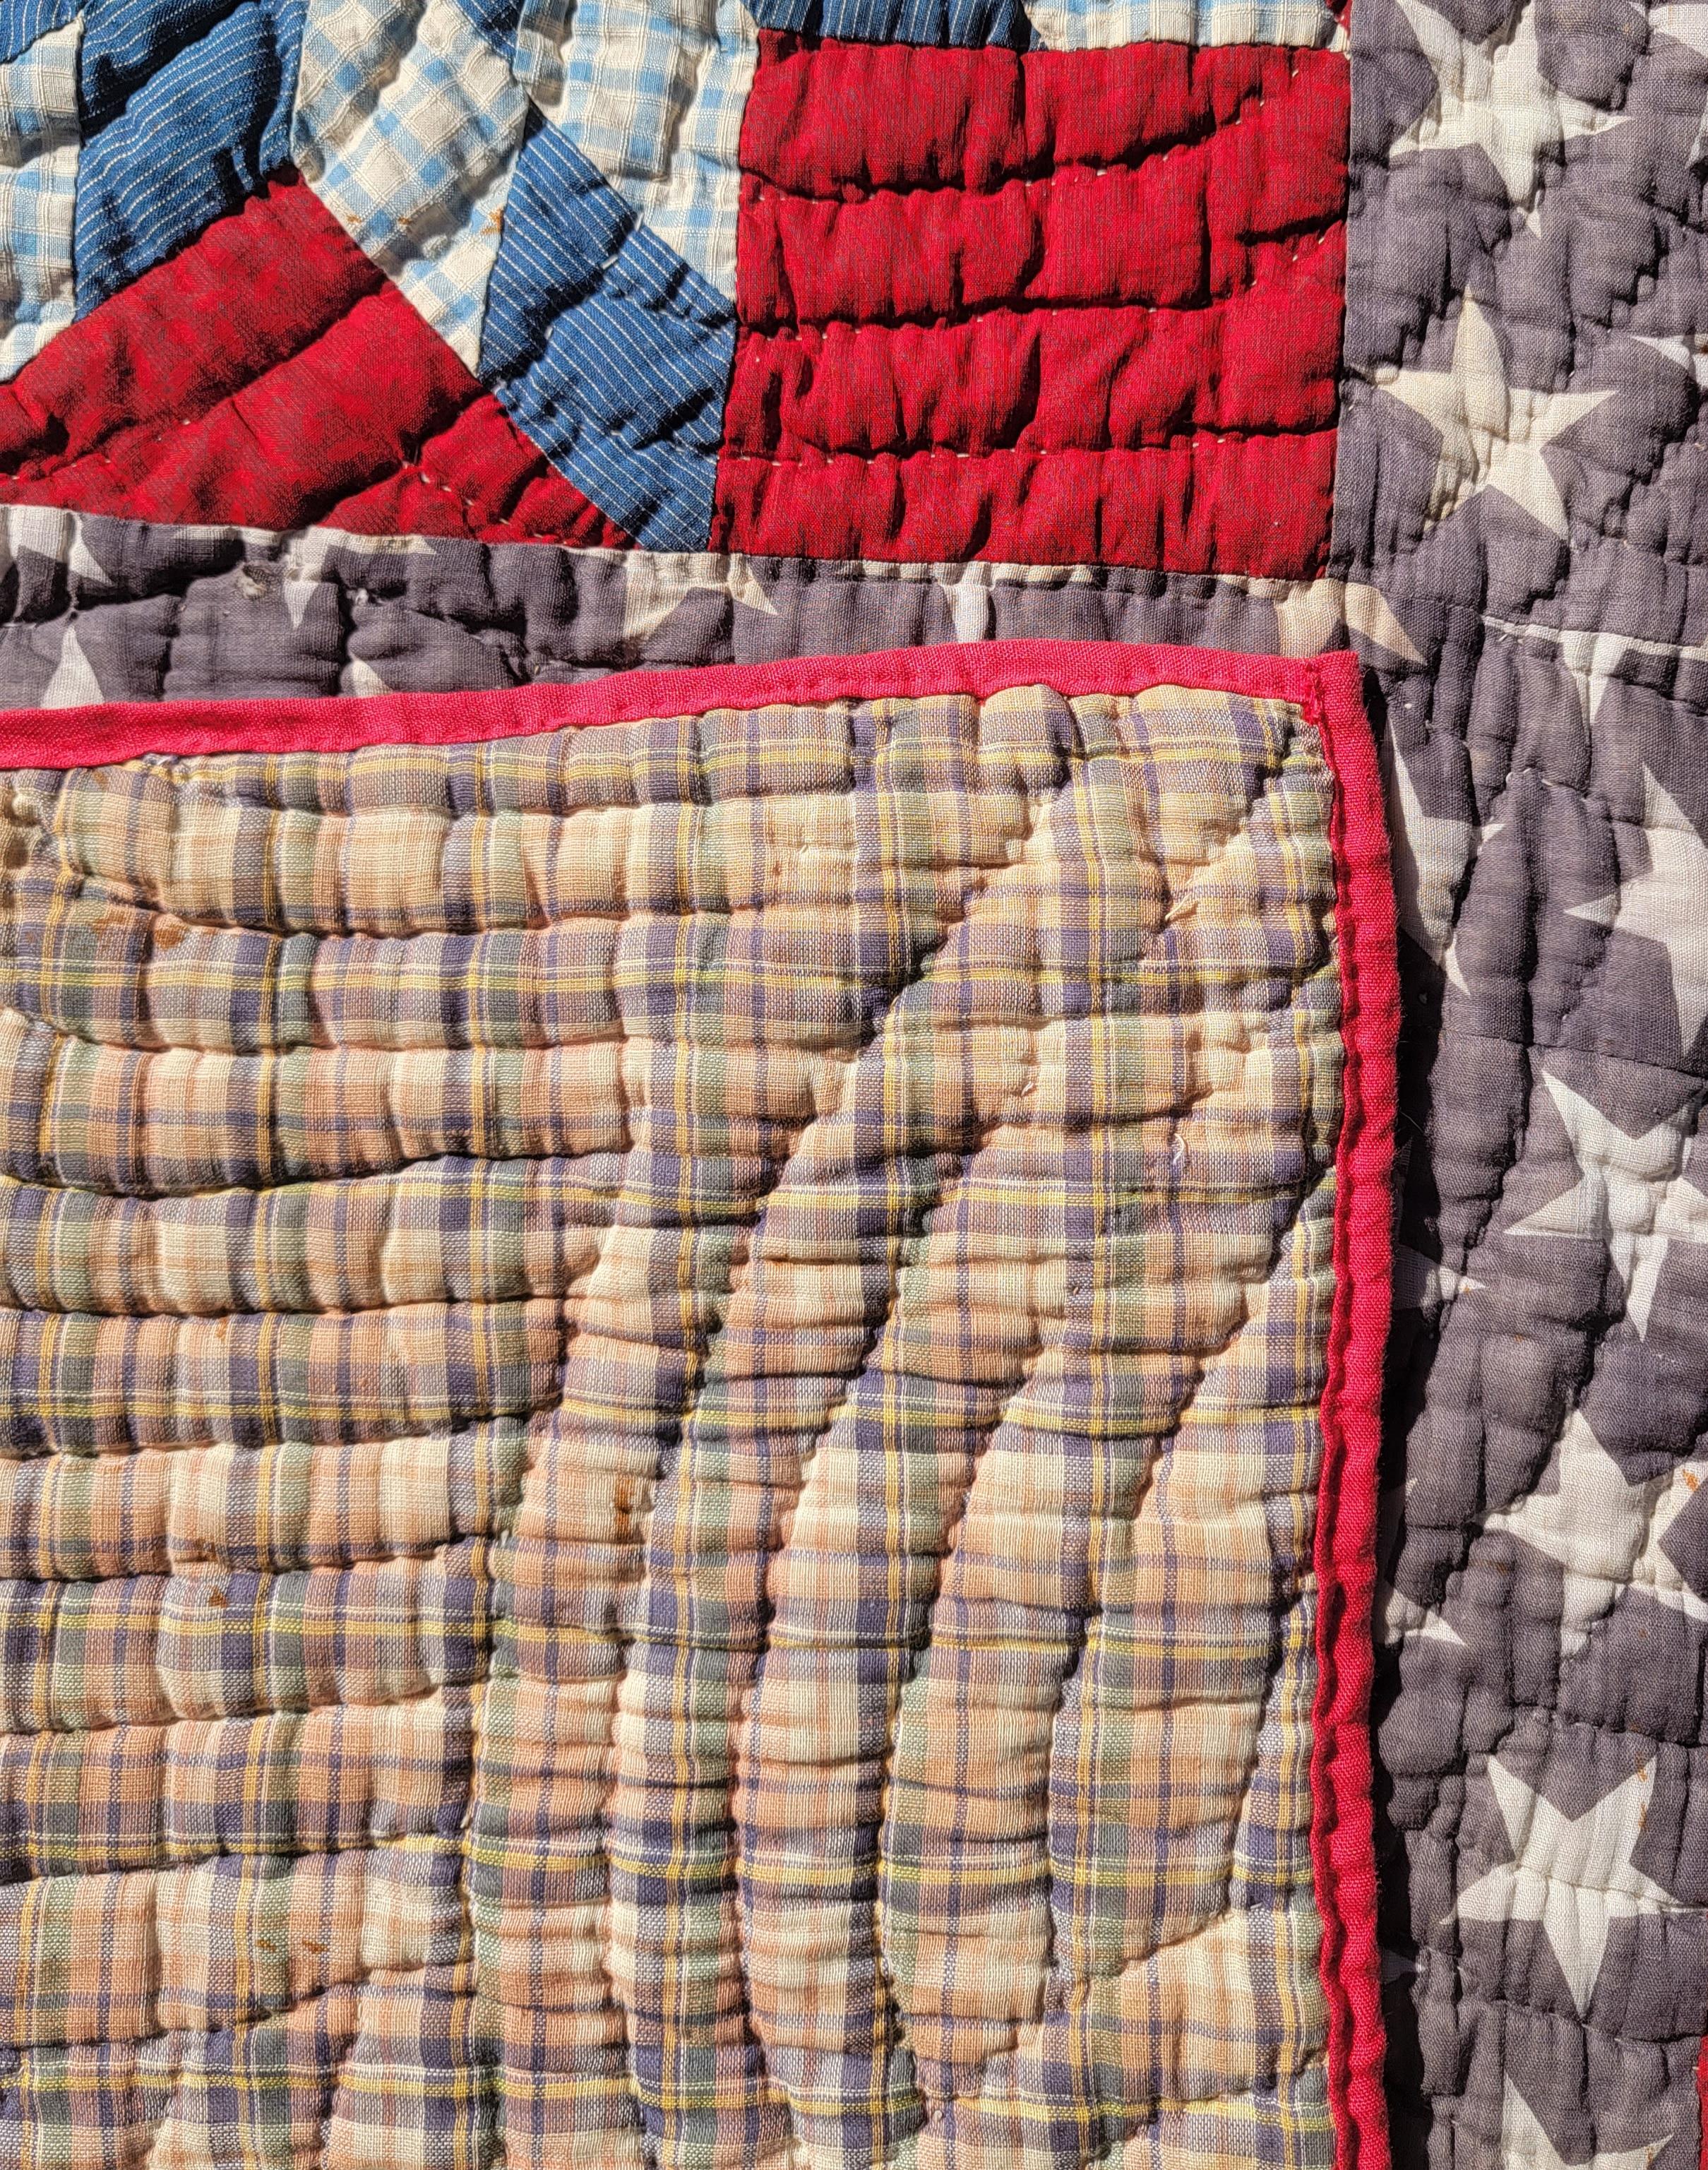 Cotton 19thc Patriotic Contained Eight Point Stars Quilt